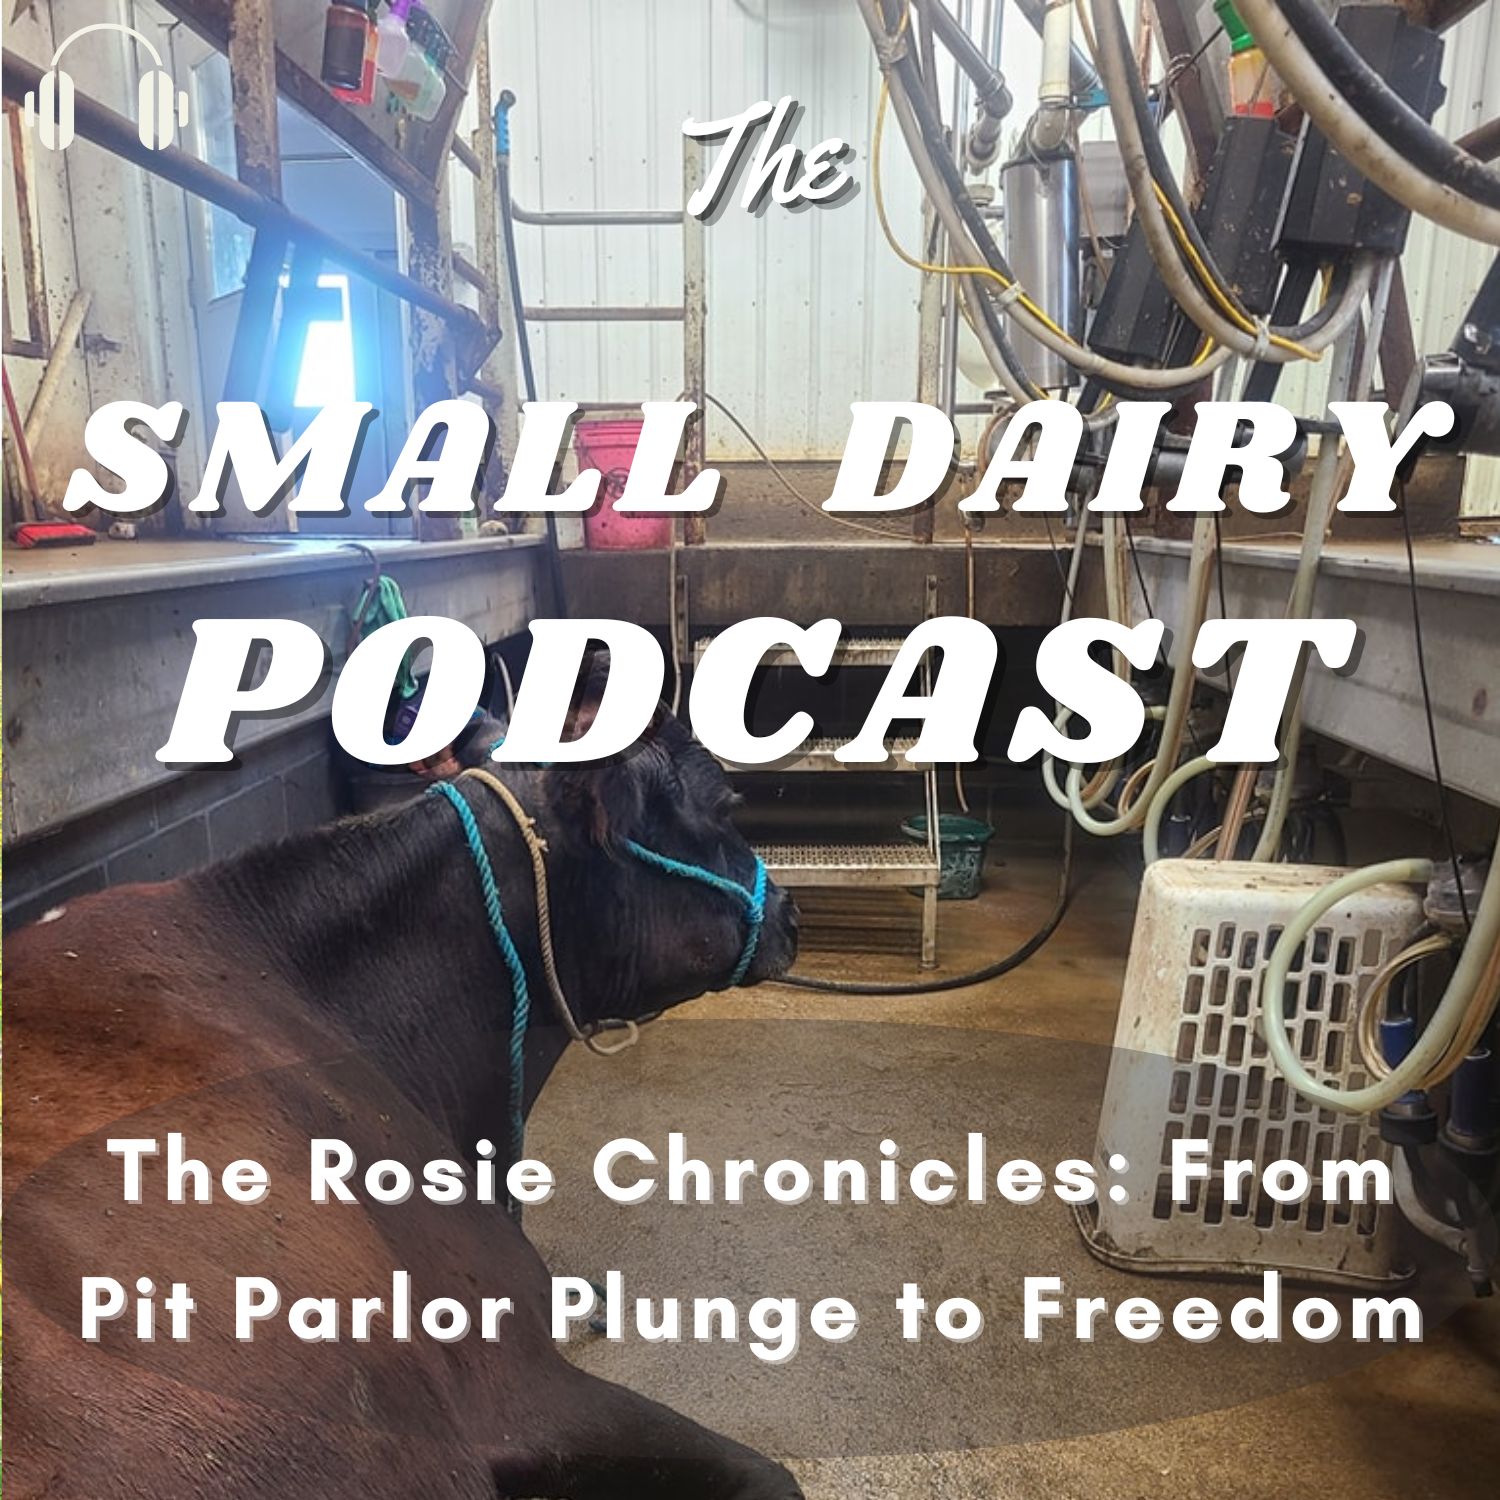 Artwork for podcast The Small Dairy Podcast